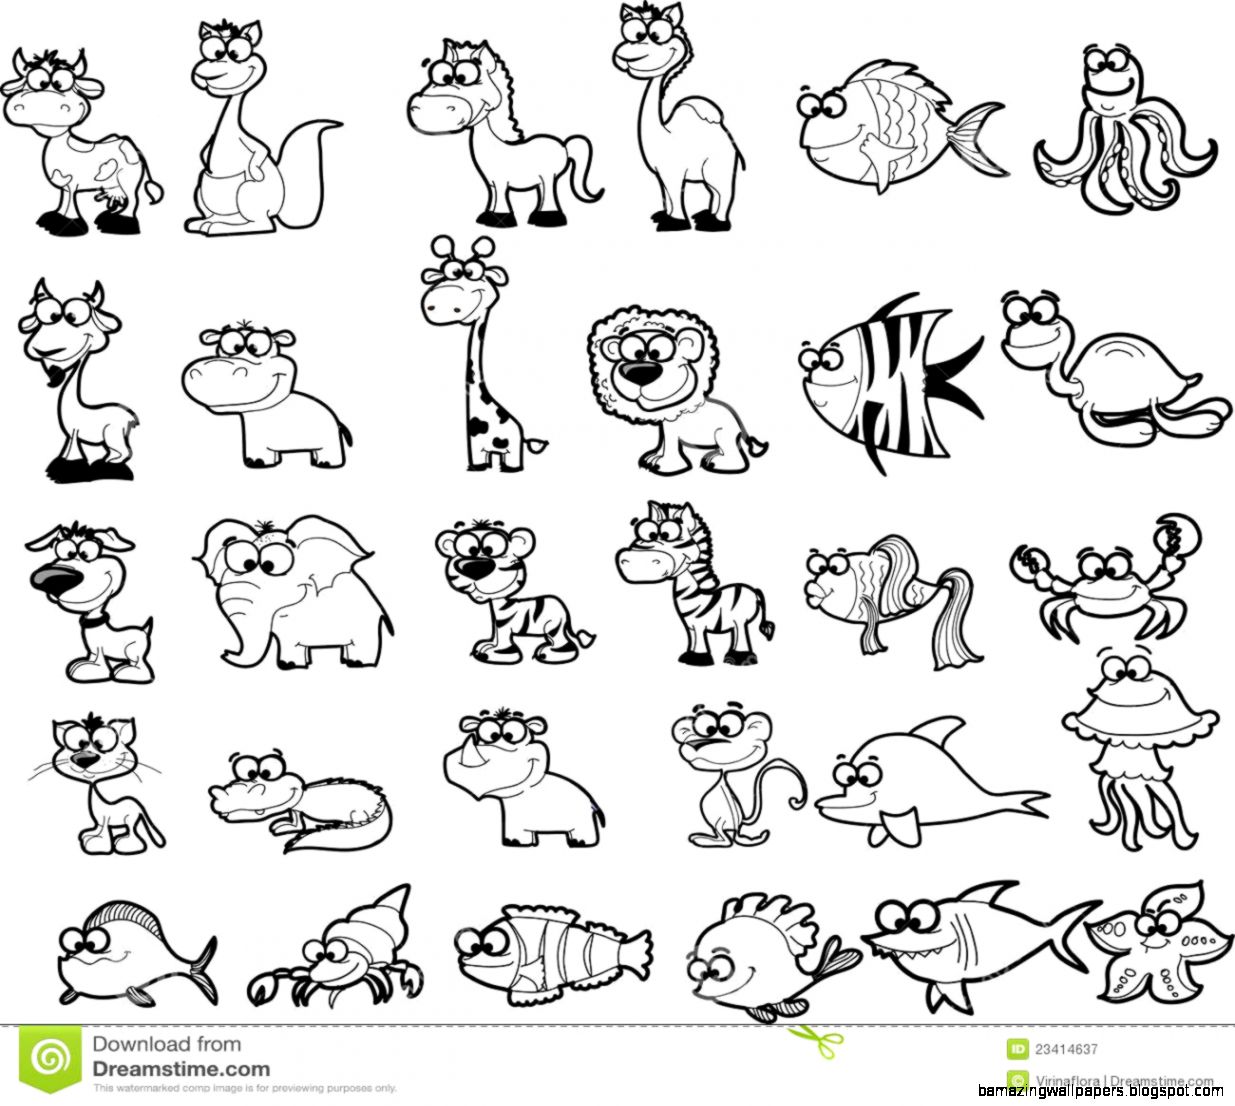 Rainforest Animals Clipart Black And White Amazing Wallpapers